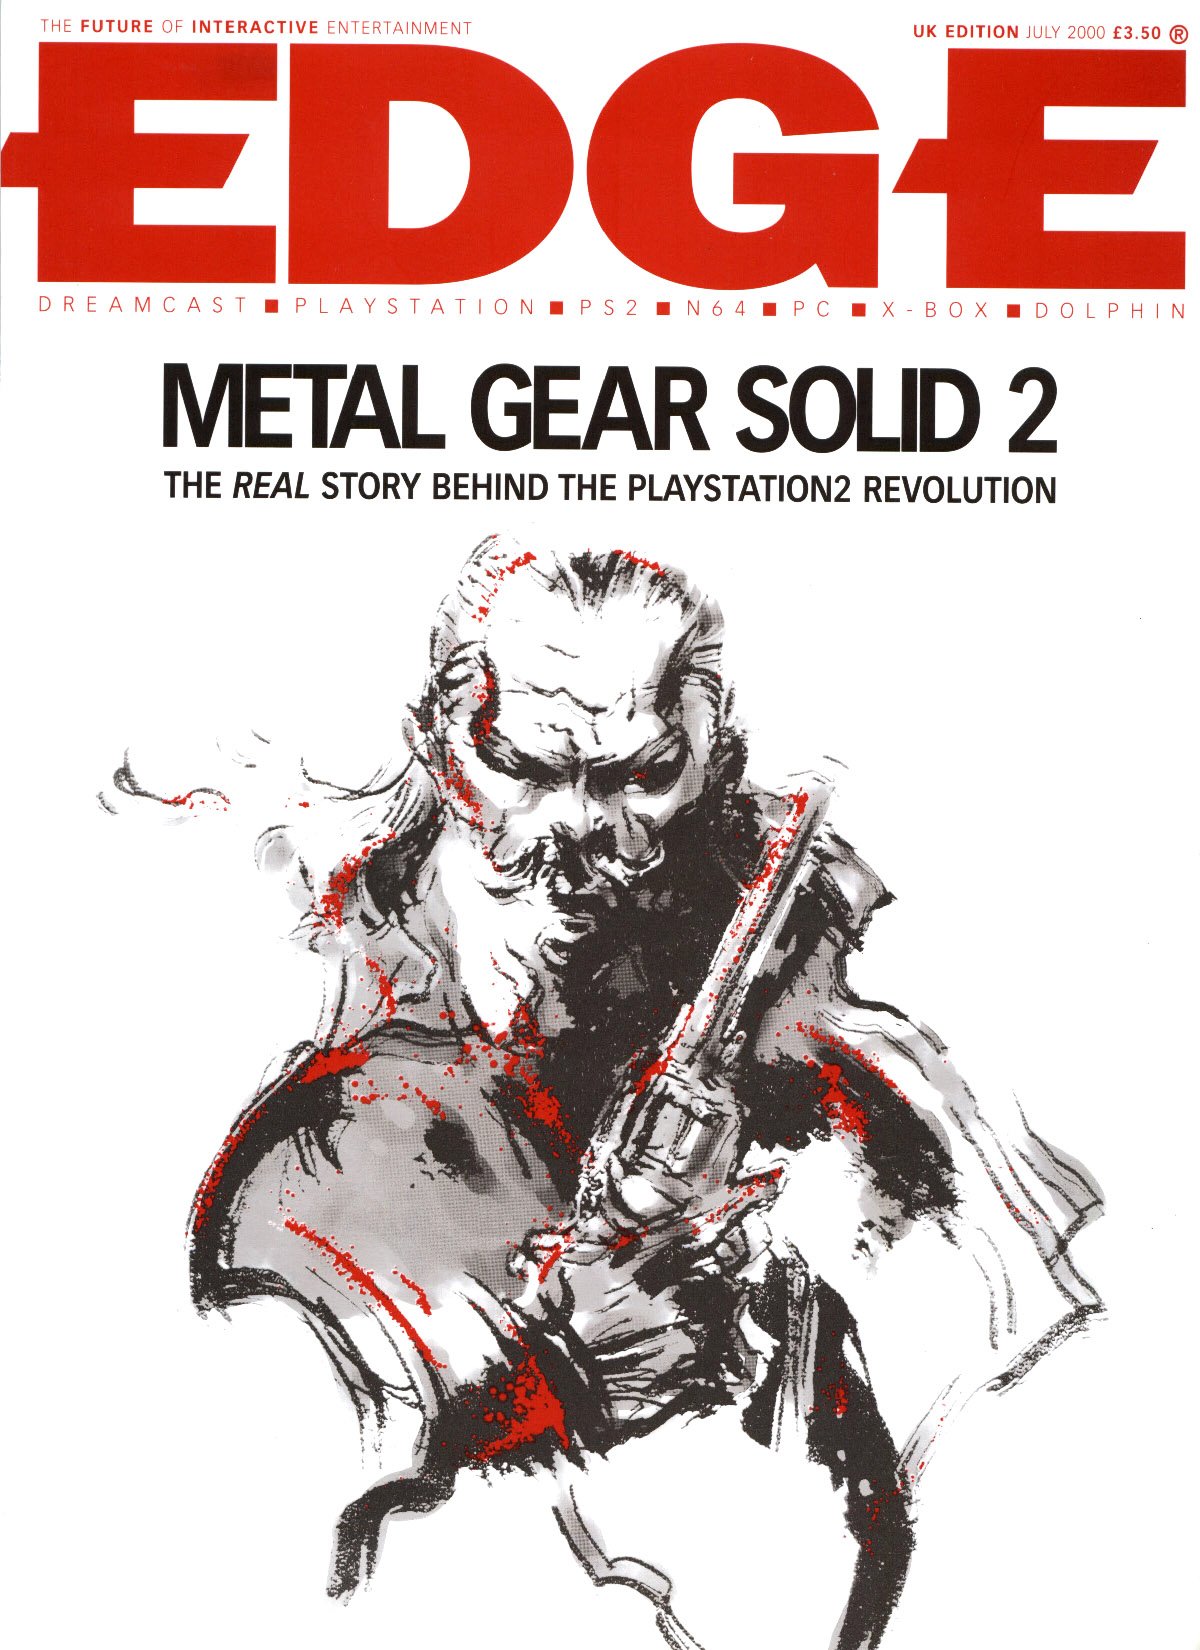 EDGE Issue 086 (July 2000)